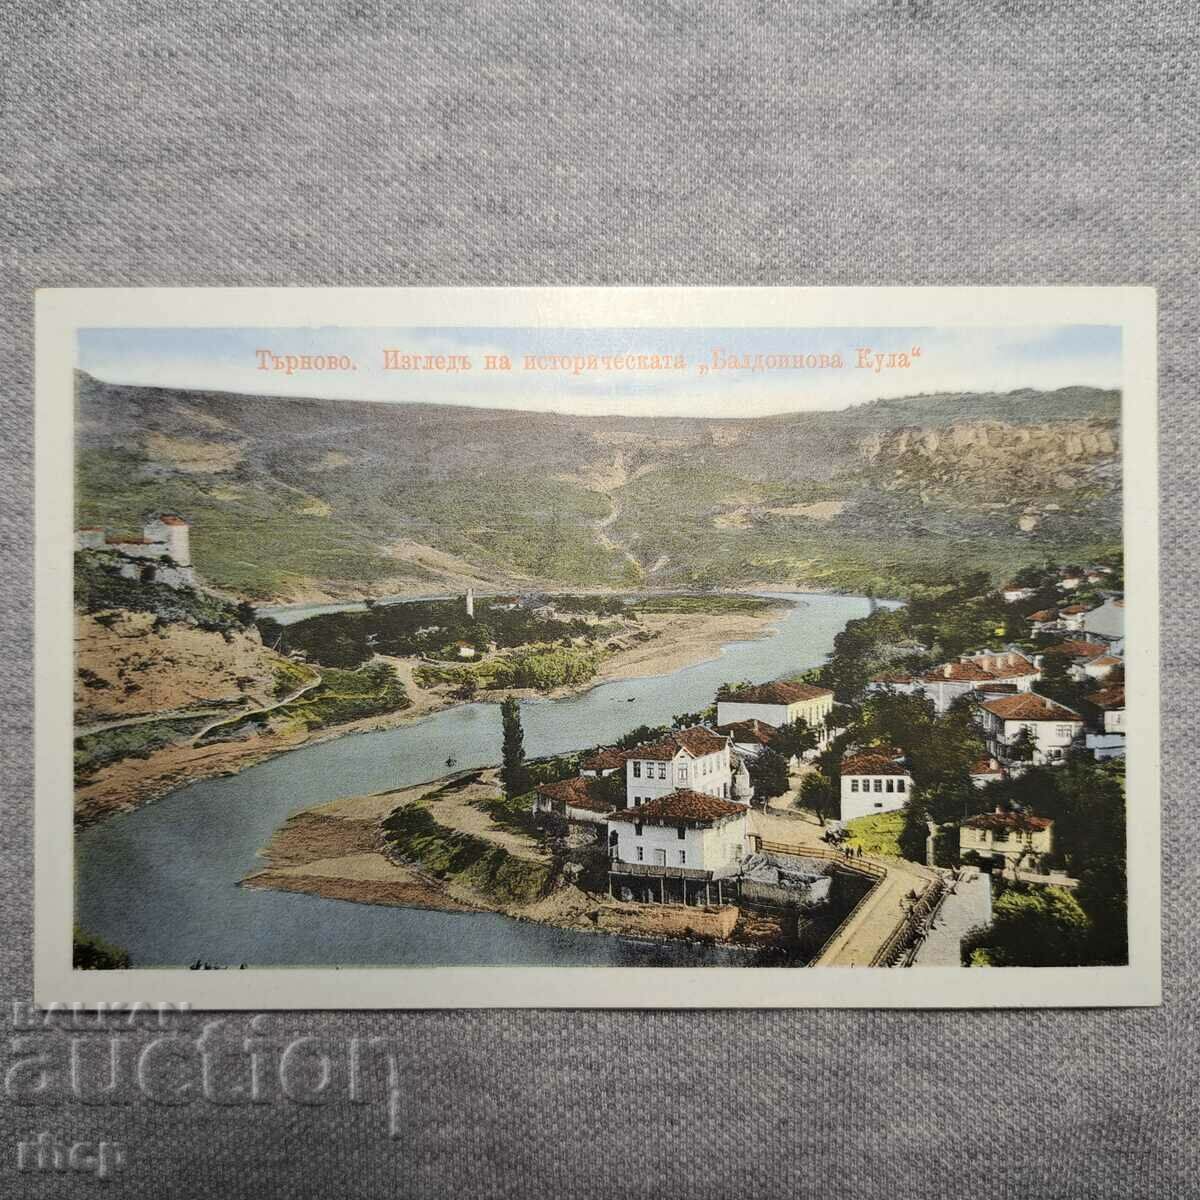 Tarnovo, an old color card from the beginning of the 20th century